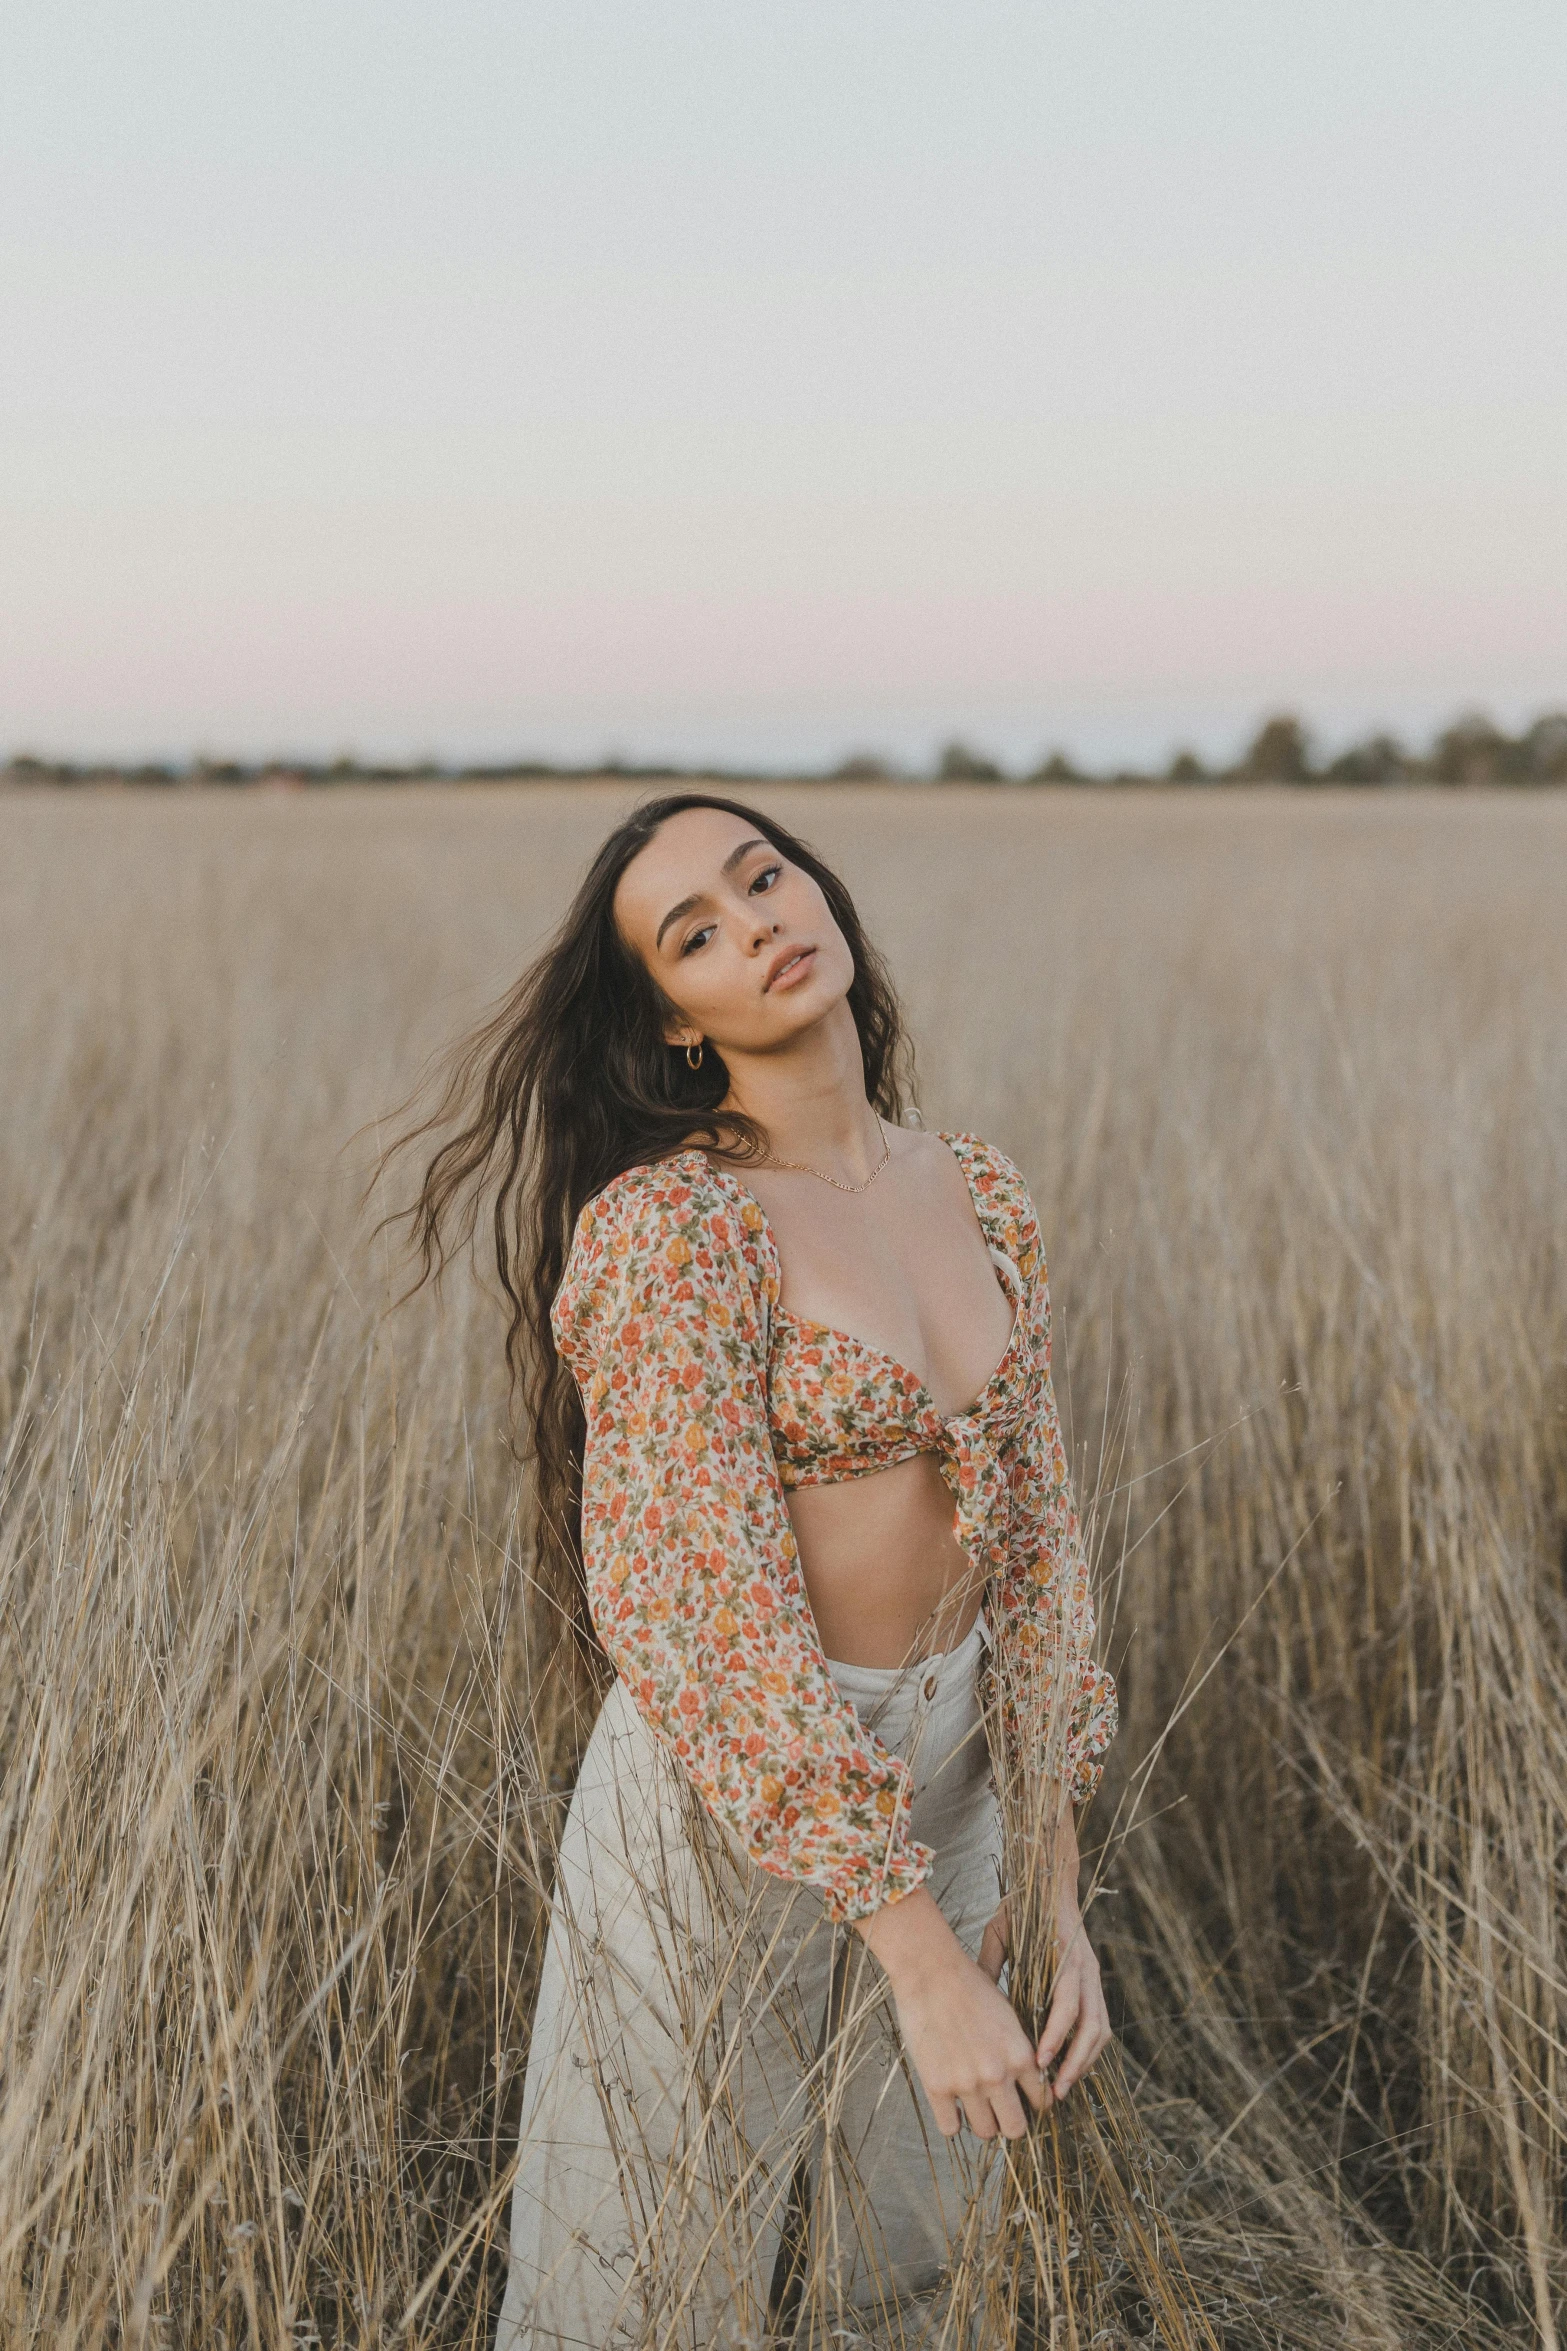 woman standing in a field posing for the camera